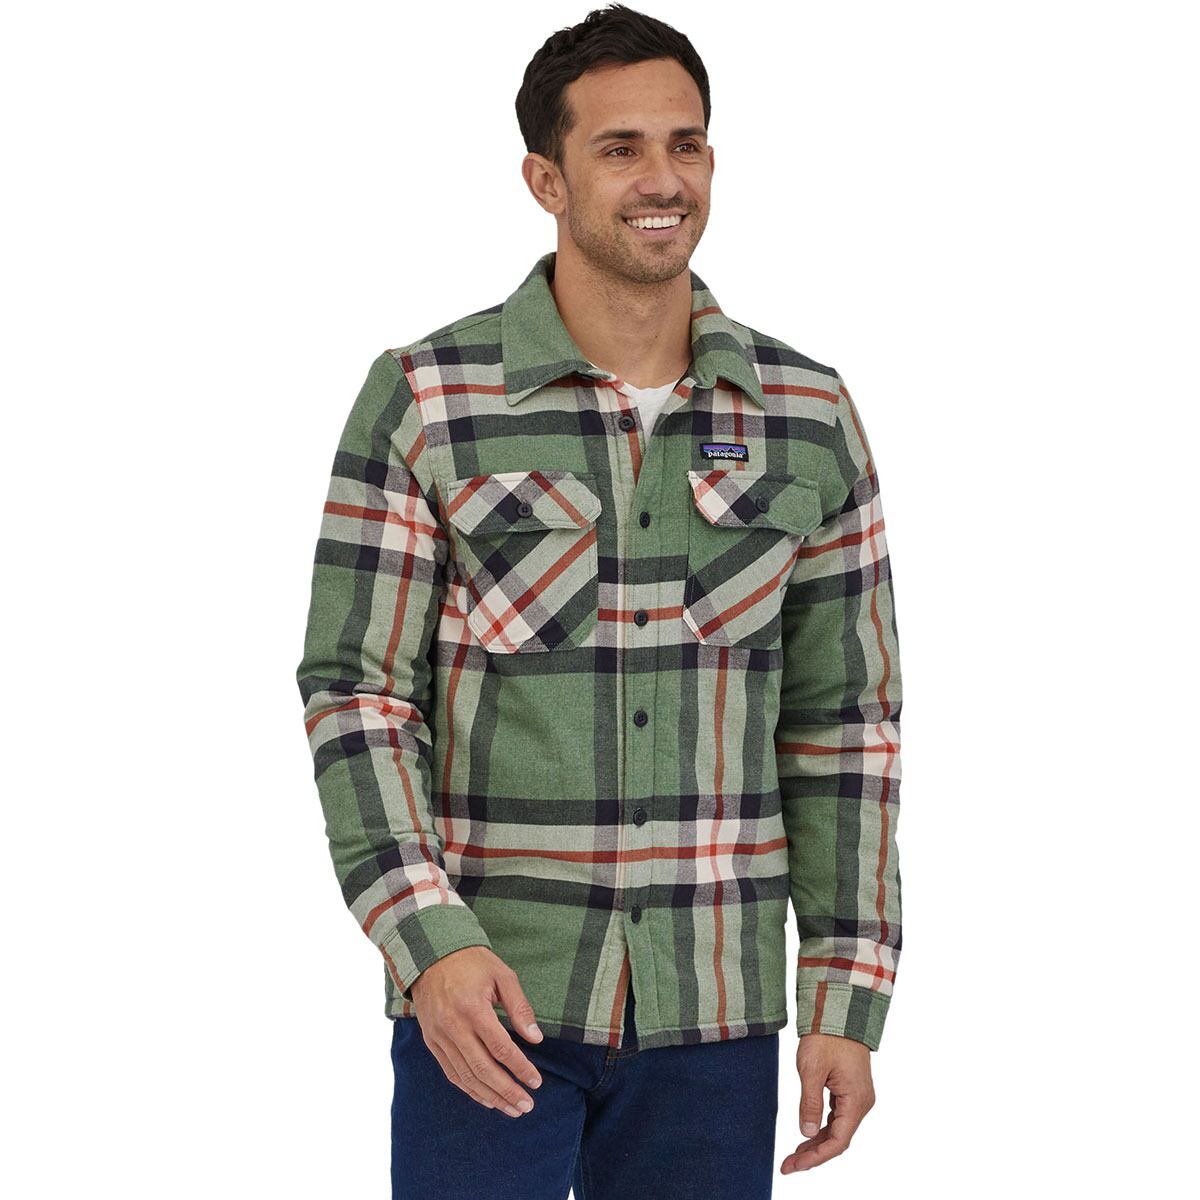 Patagonia Insulated Organic Cotton Fjord Flannel Shirt - Men's Forestry: Hemlock Green, XXL